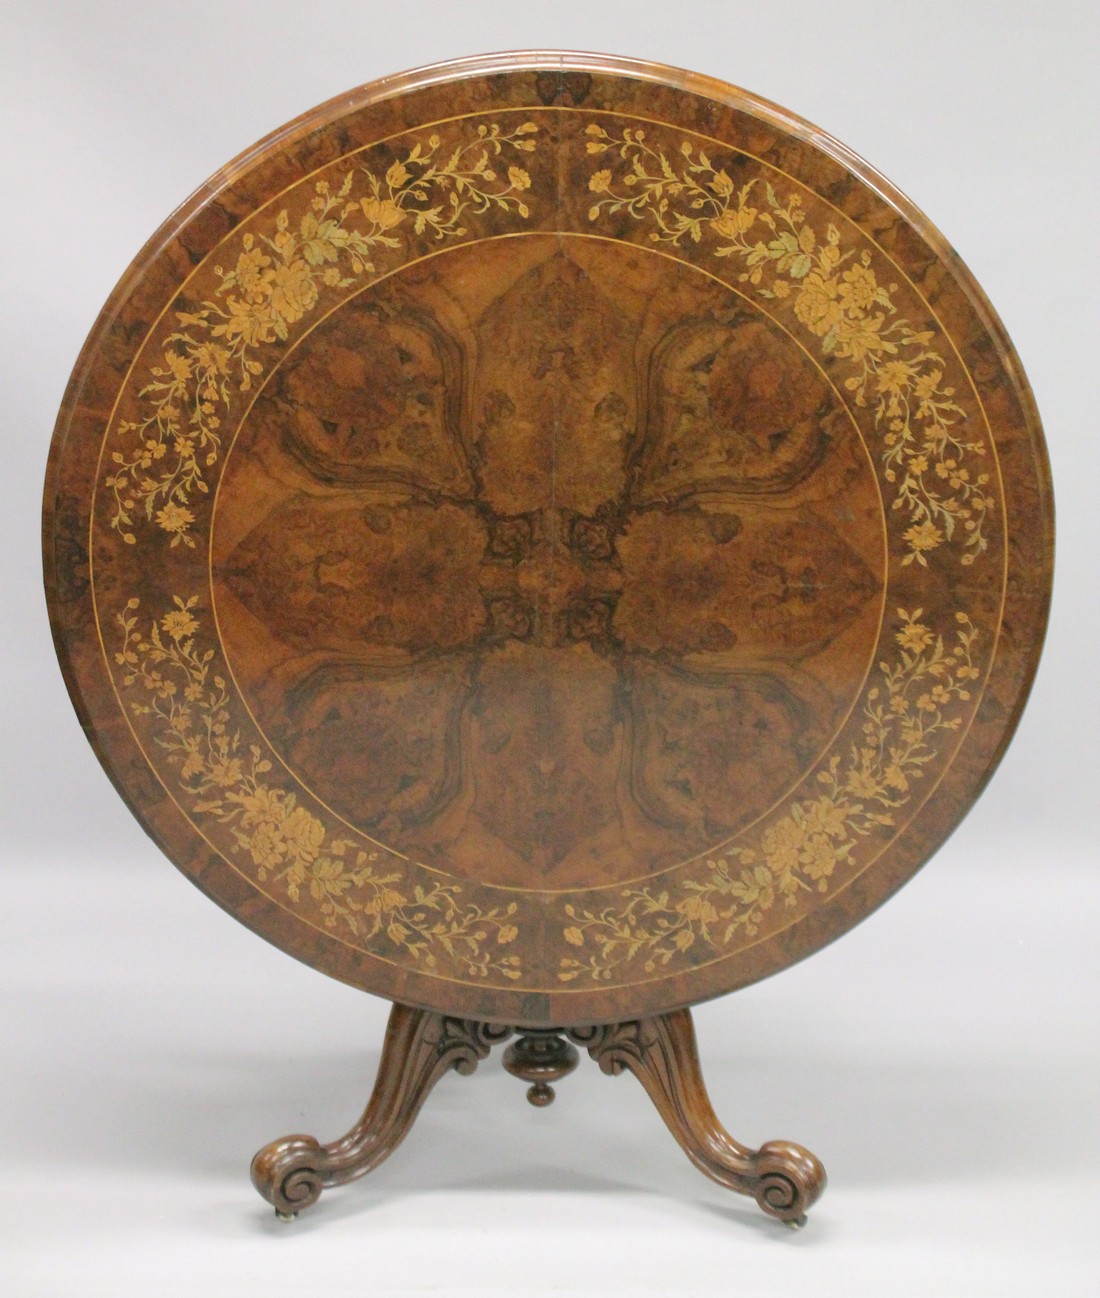 A GOOD VICTORIAN FIGURED WALNUT AND MARQUETRY CIRCULAR LOO DINING TABLE with quartered marquetry top - Image 2 of 6